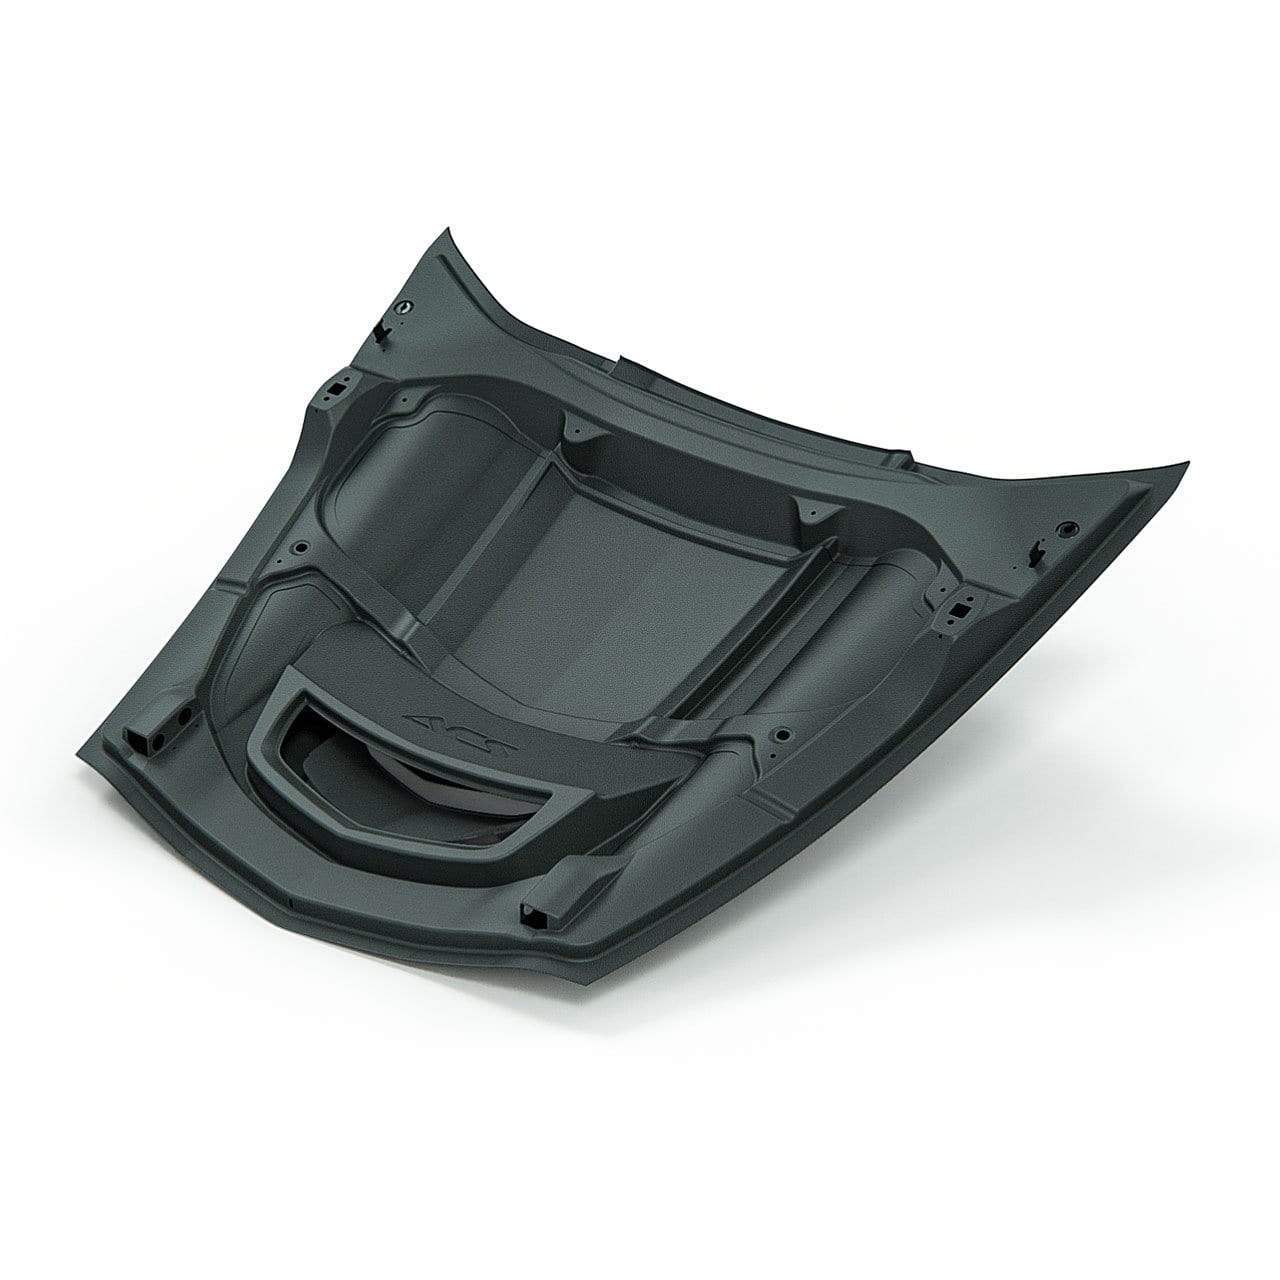 ACS Composite C7-ZR1 Hood for Chevrolet Corvette C7, SKU 45-4-203, in Fiber-Reinforced Polymer (FRP) with dual extractor system and improved cooling capacity.